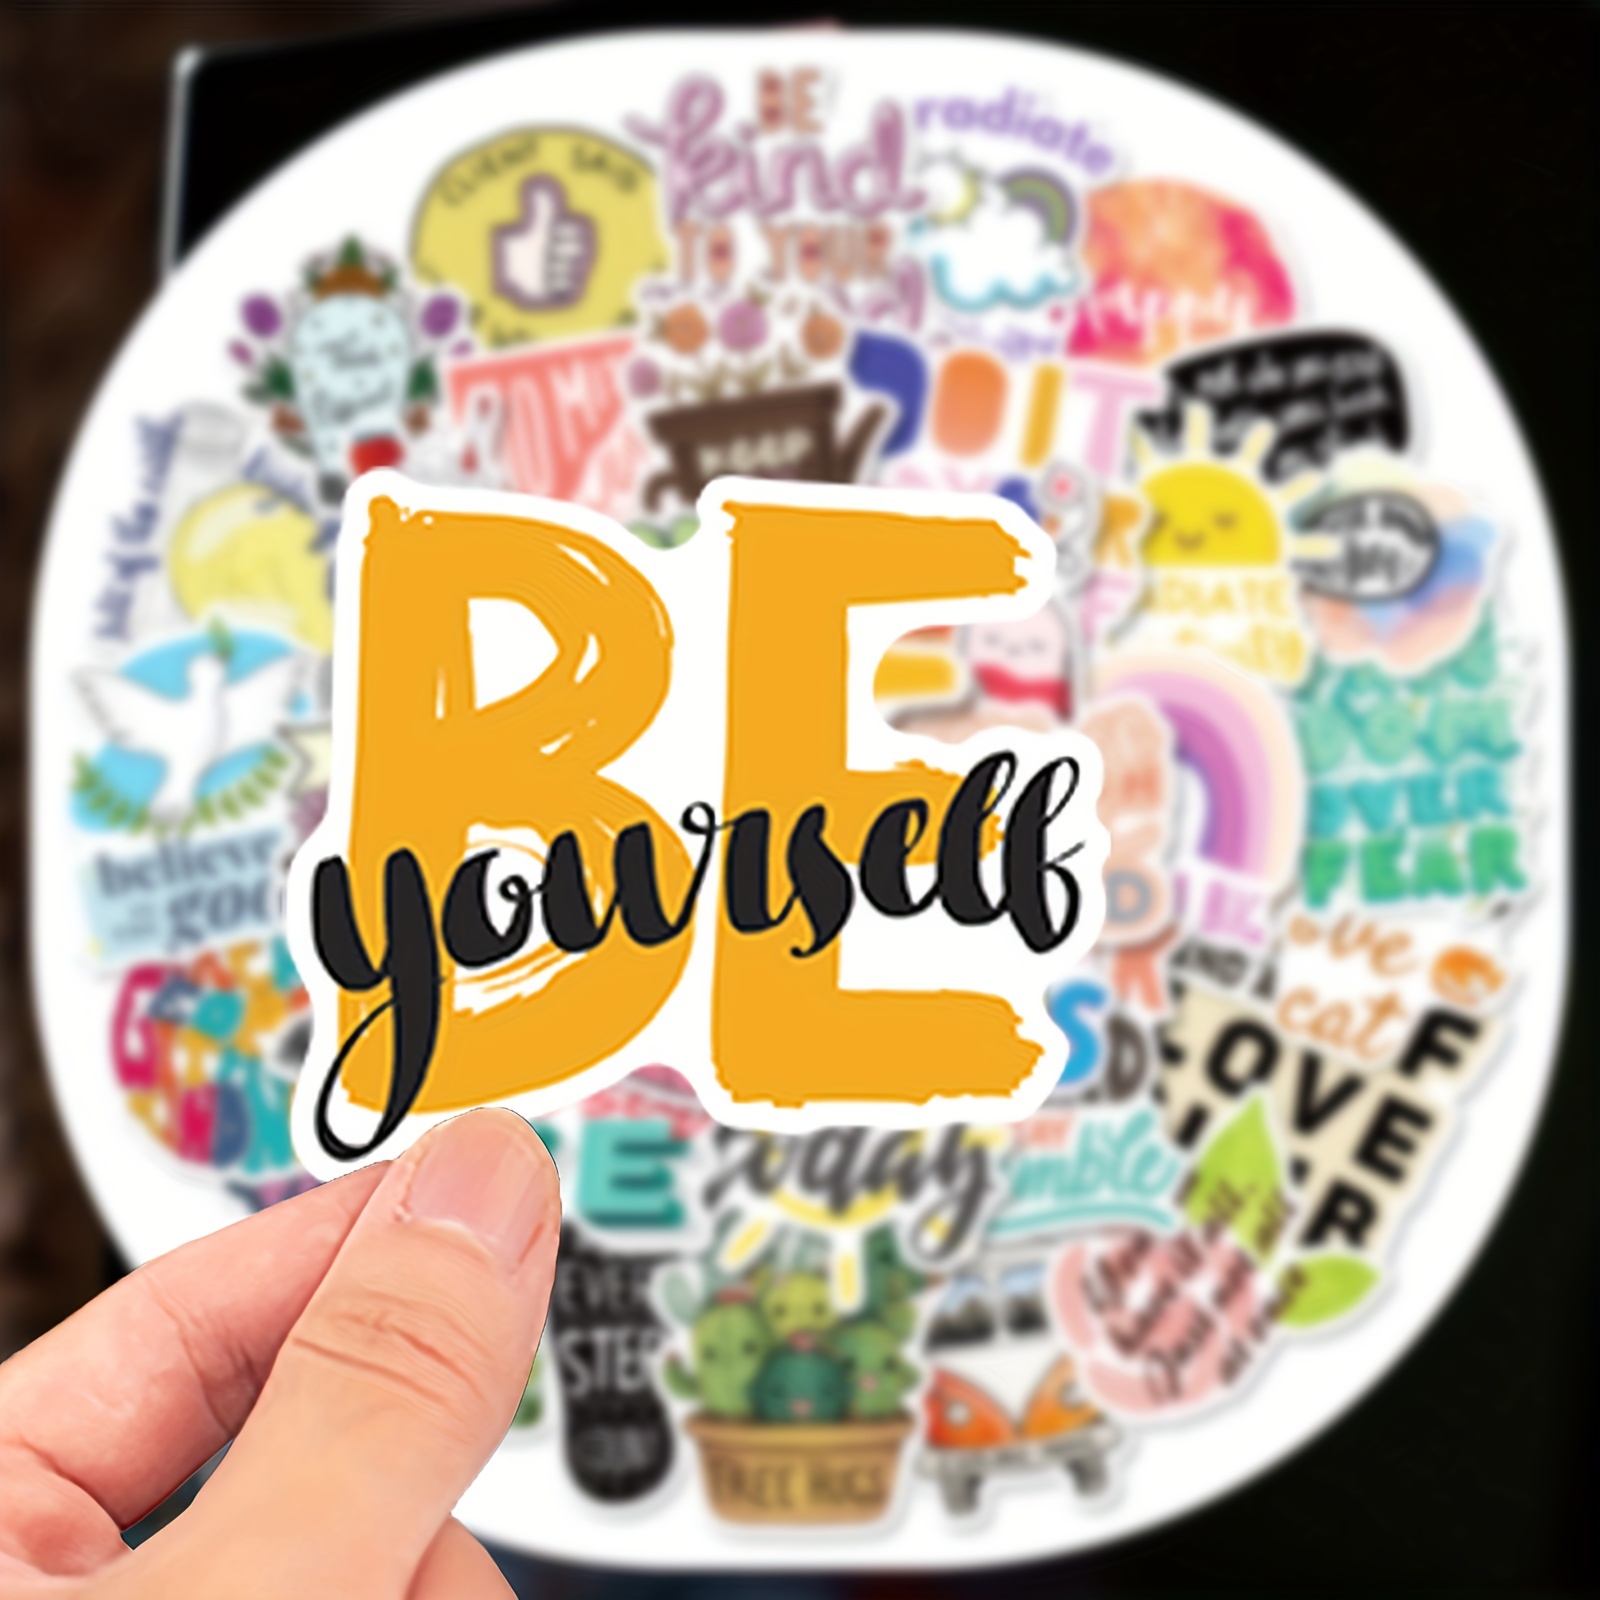  400Pcs Inspirational Words Stickers, Motivational Waterproof  Vinyl Stickers for Kids Teens Adults Teachers, Positive Quote Stickers for  Water Bottles Laptops Phone Journaling Scrapbooking : Toys & Games